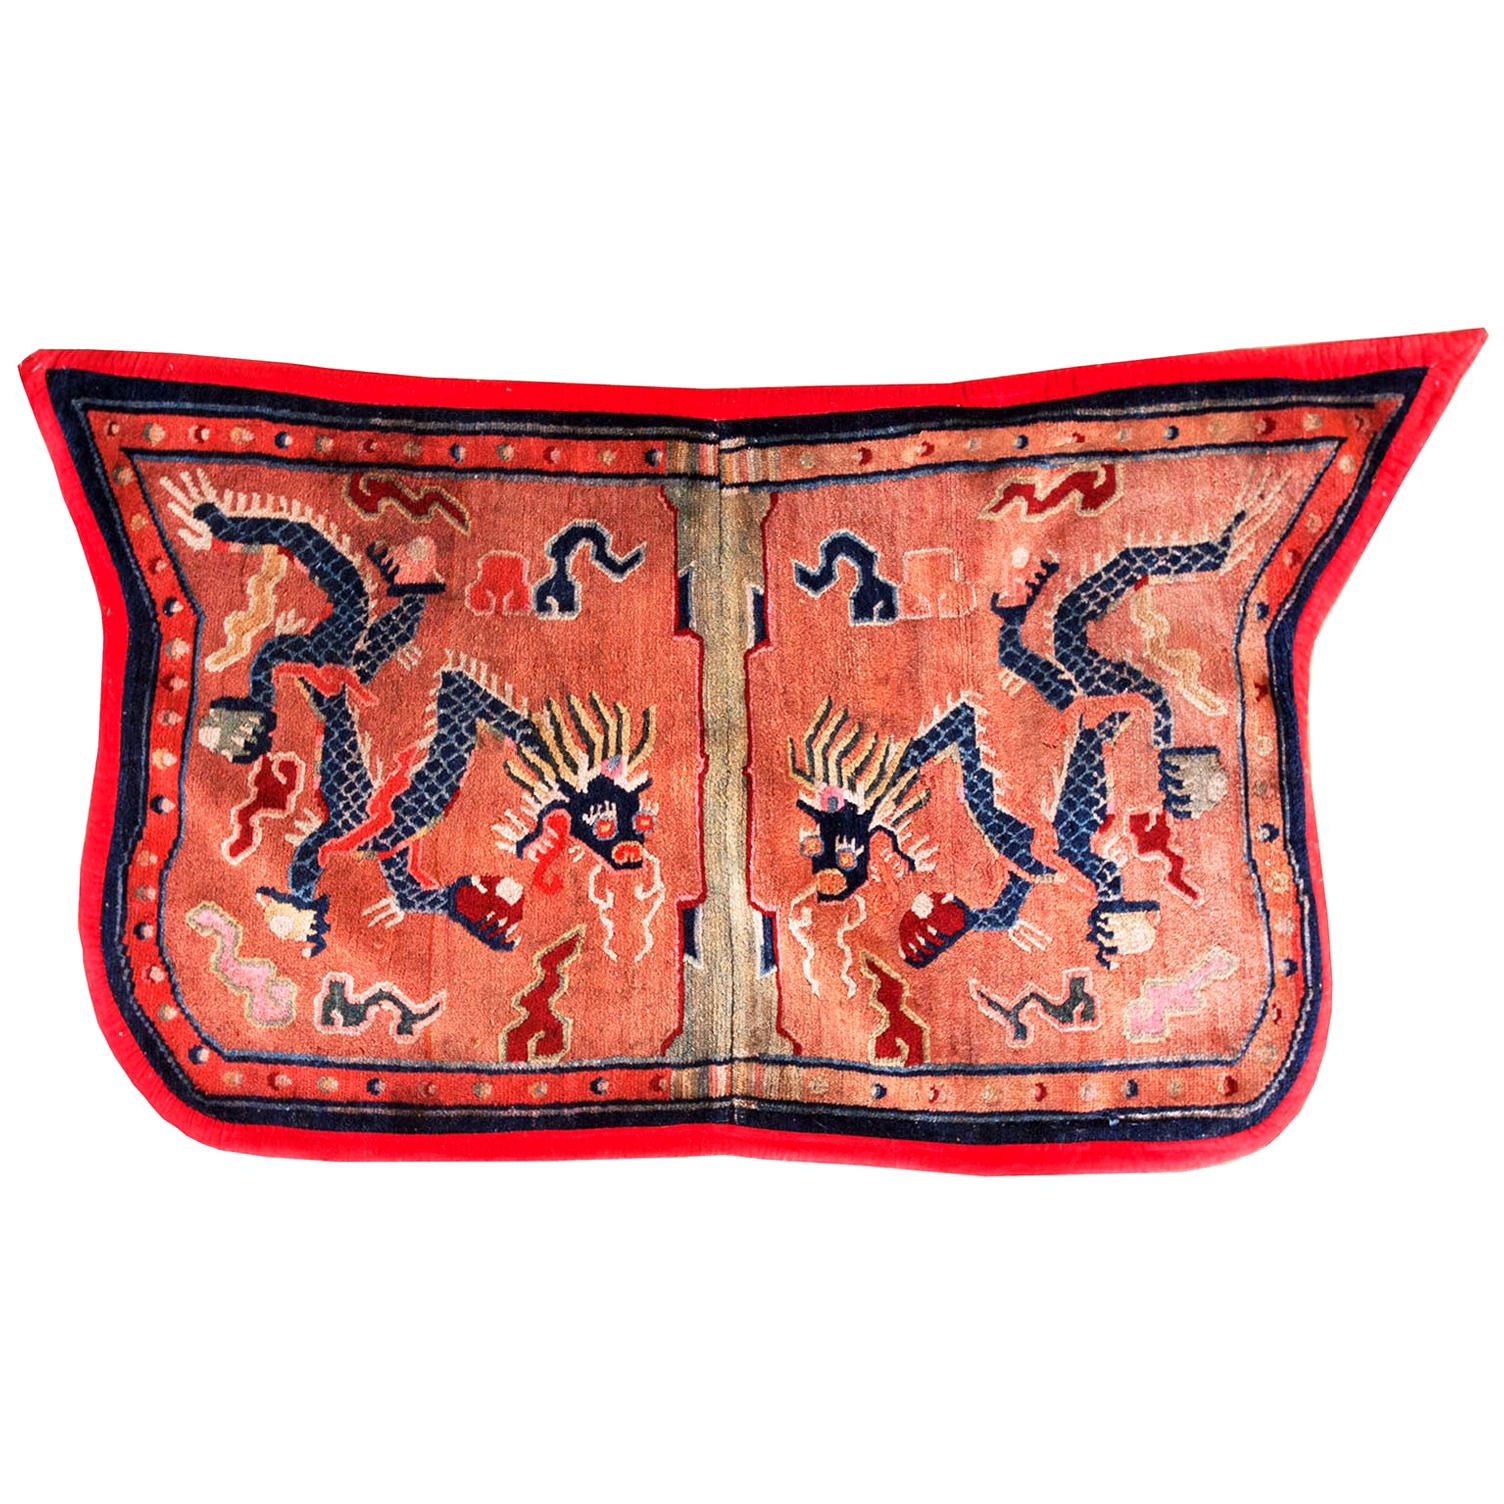 Early 20th Century Chinese Tibetan Saddle Cover ( 2'6" x 4'2" - 76 x 127 )